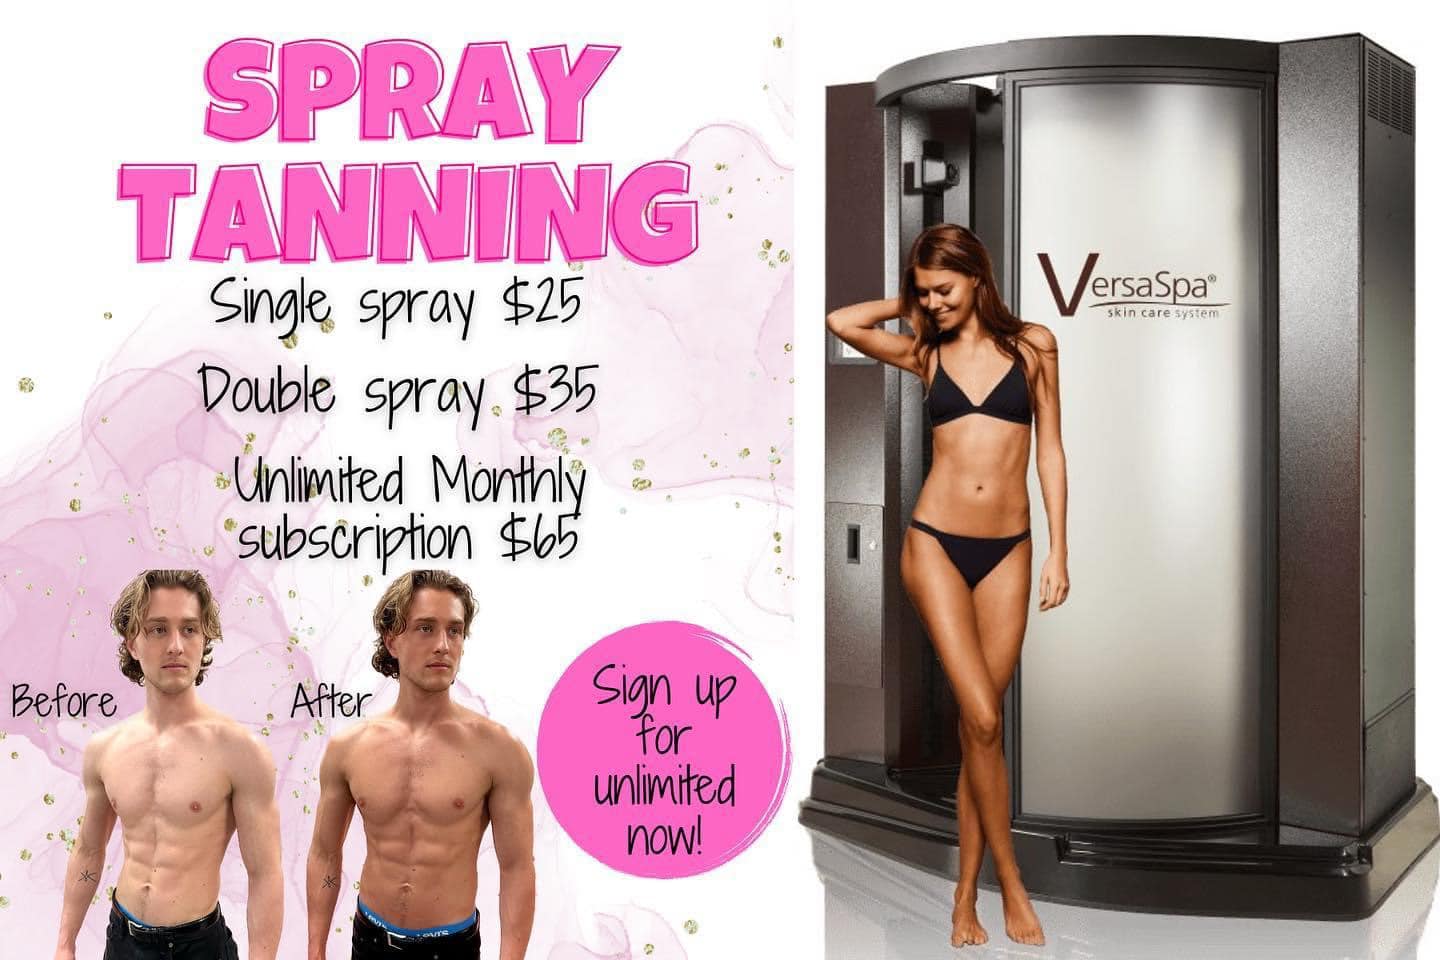 Spray Tanning Single Spray $25. Double Spray $35. Unlimited Monthly $65. Sign up for our unlimited now!